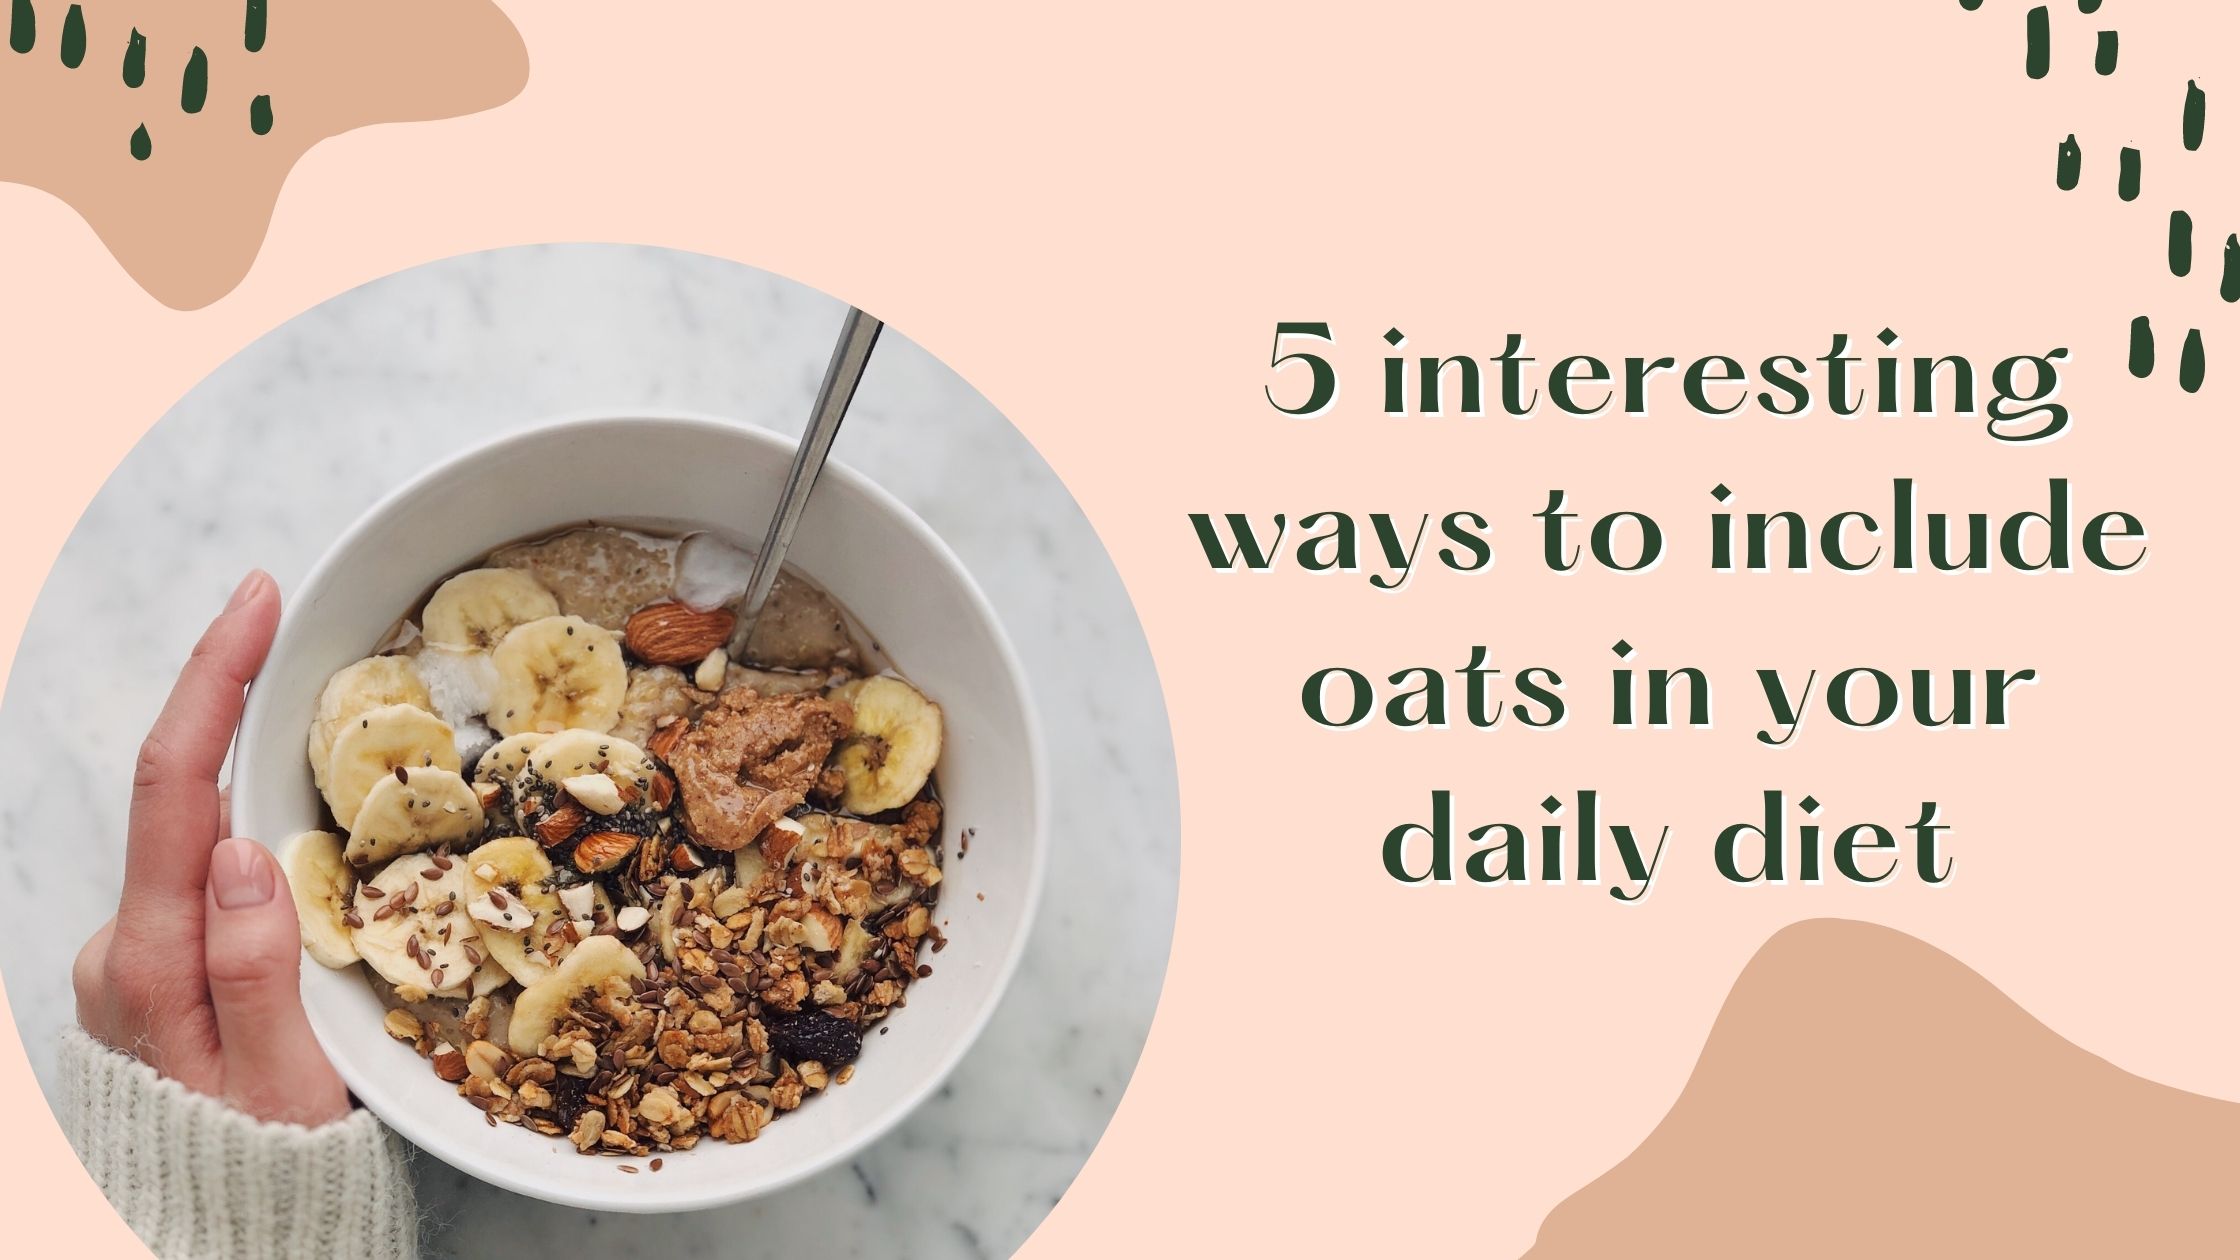 5 interesting ways to include oats in your daily diet